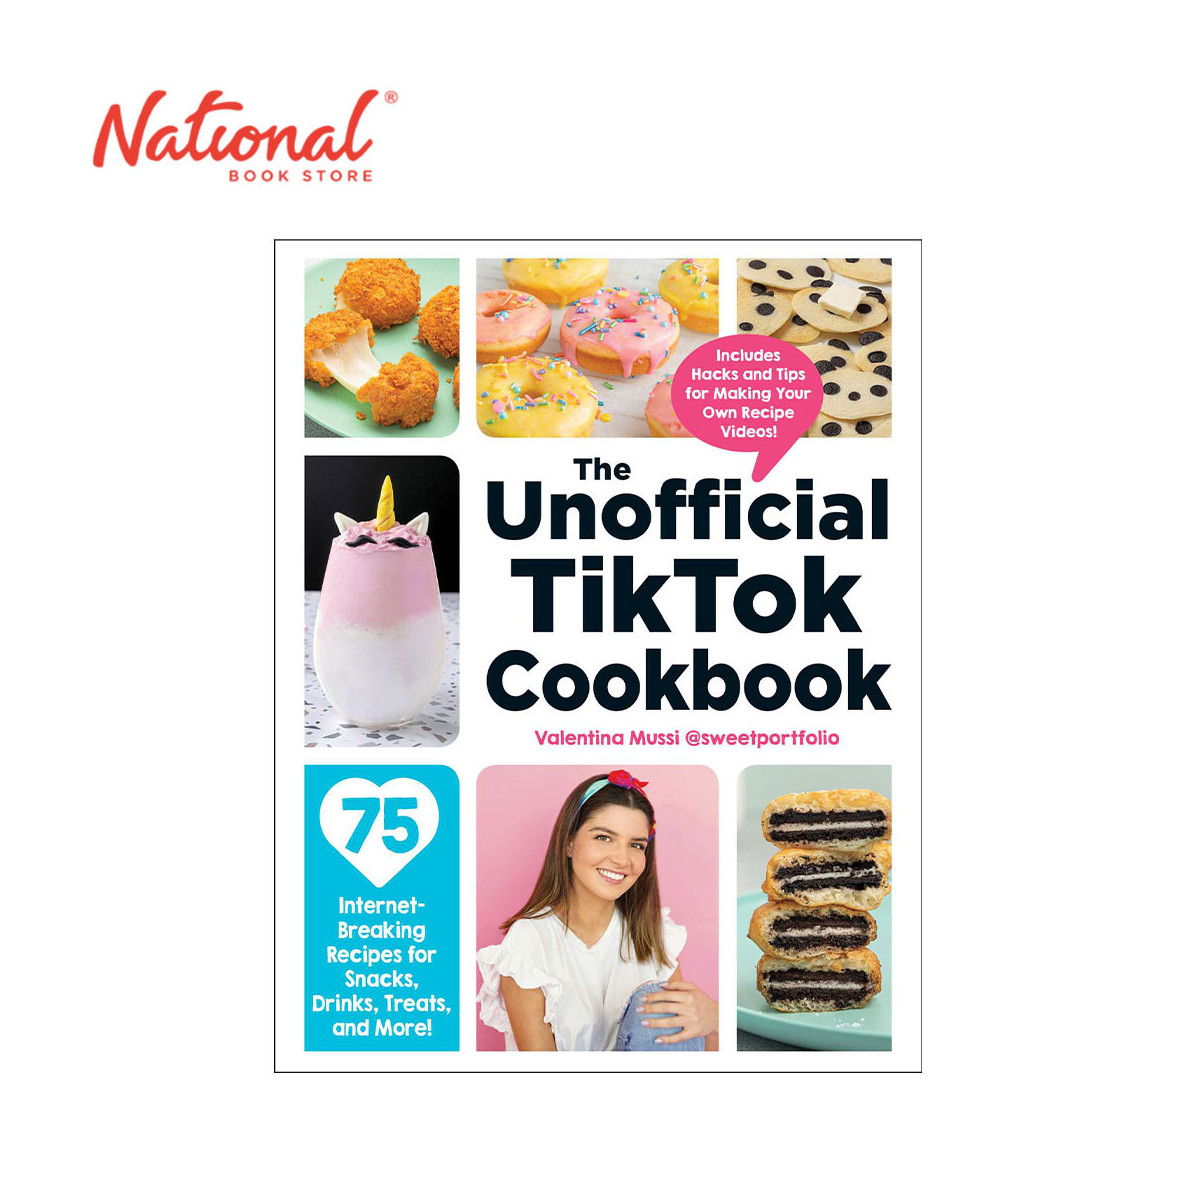 The Unofficial Tiktok Cookbook by Valentina Mussi - Hardcover - Food & Beverage